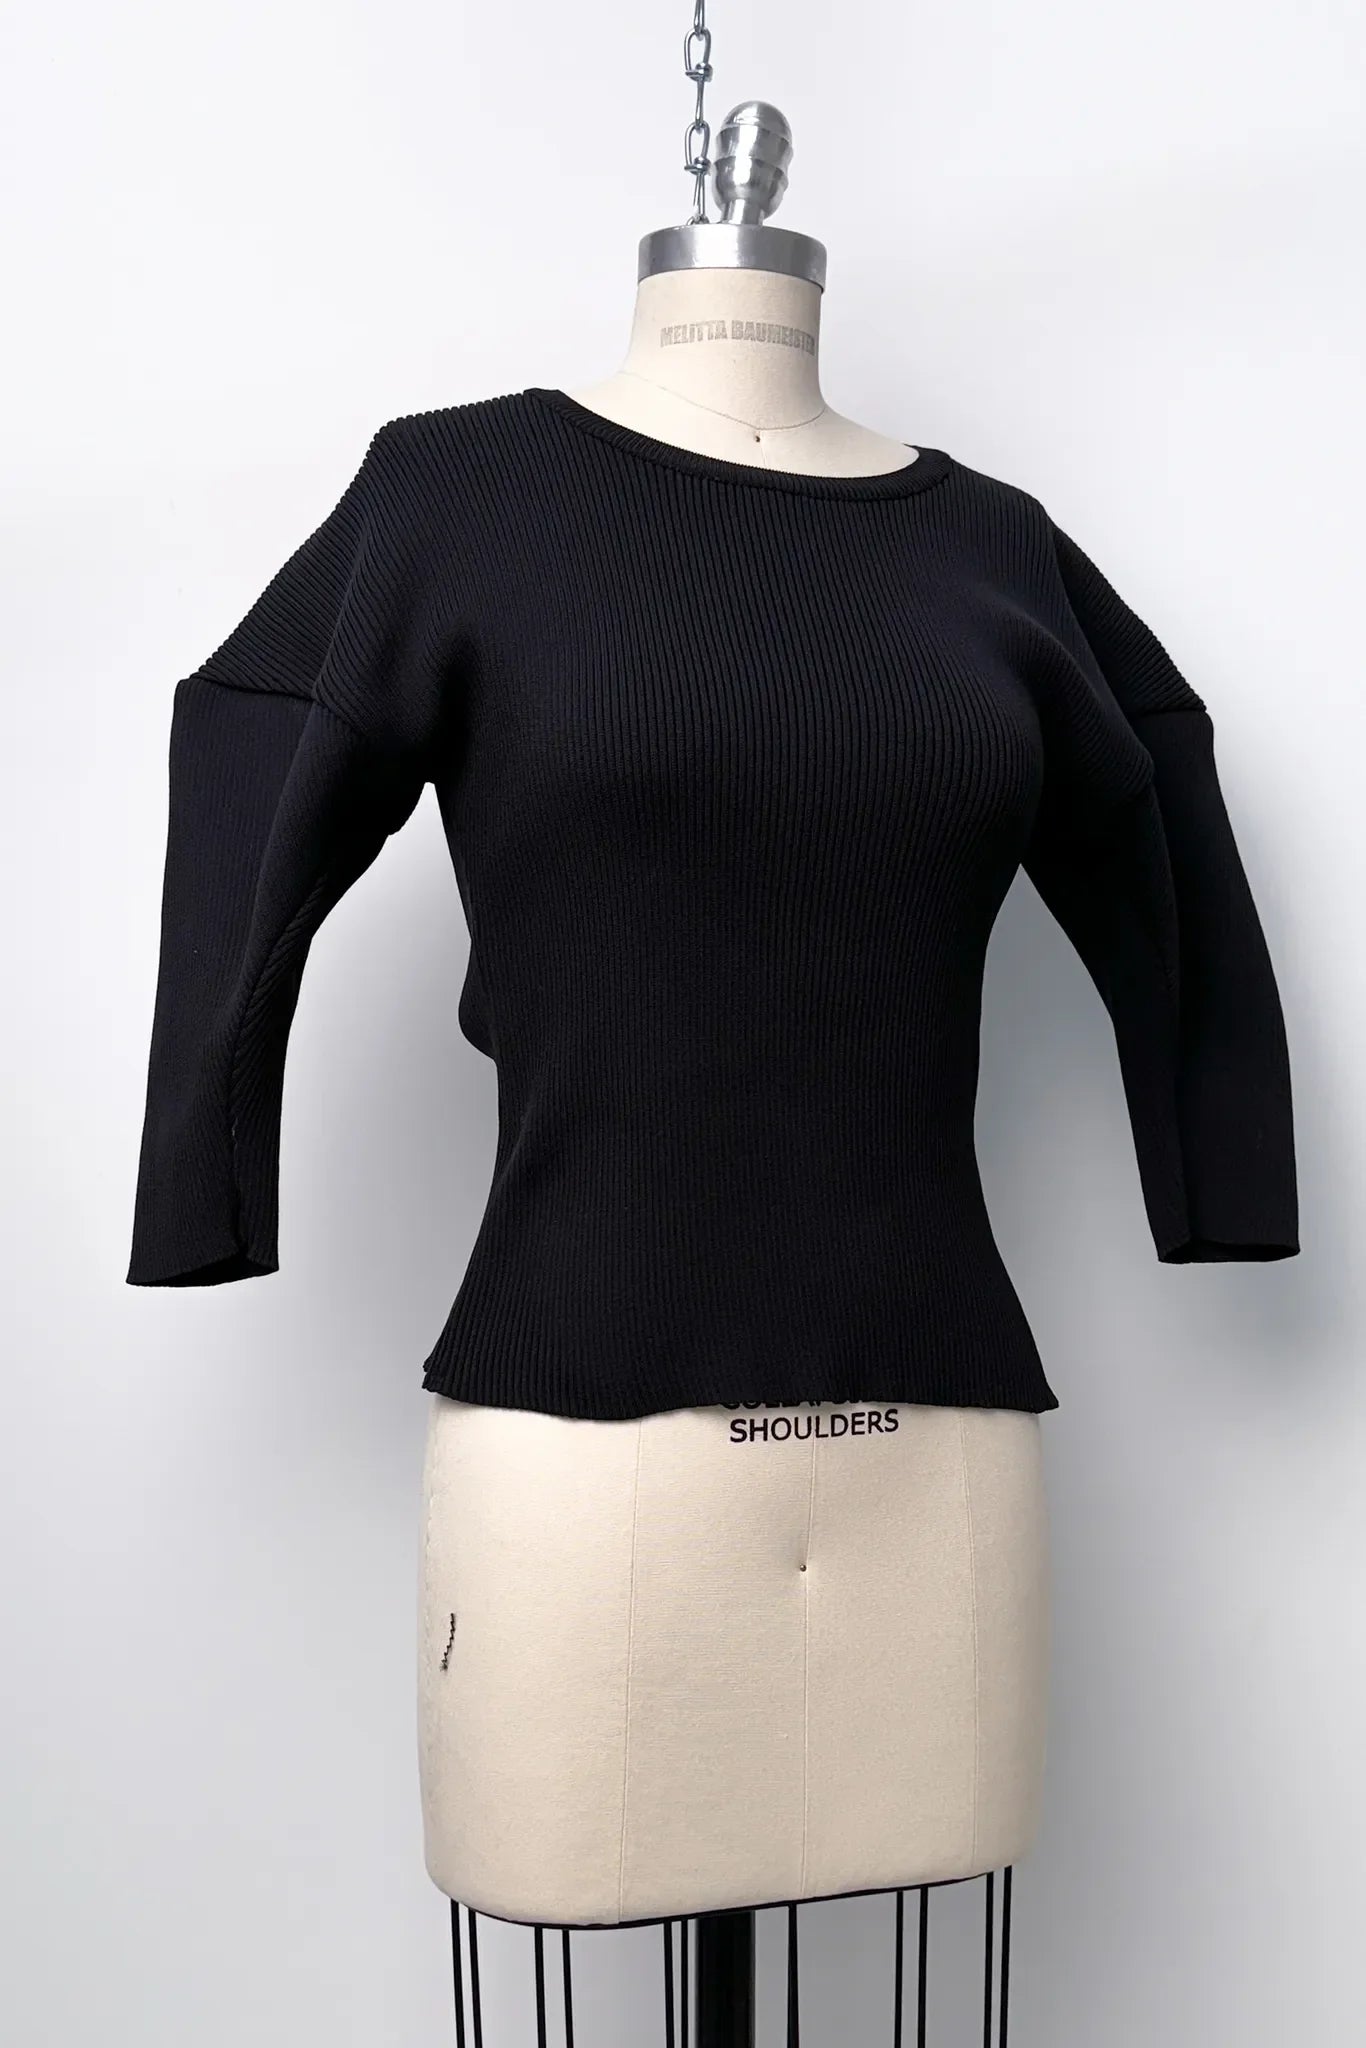 016 light ribbed top with sleeve volume detail